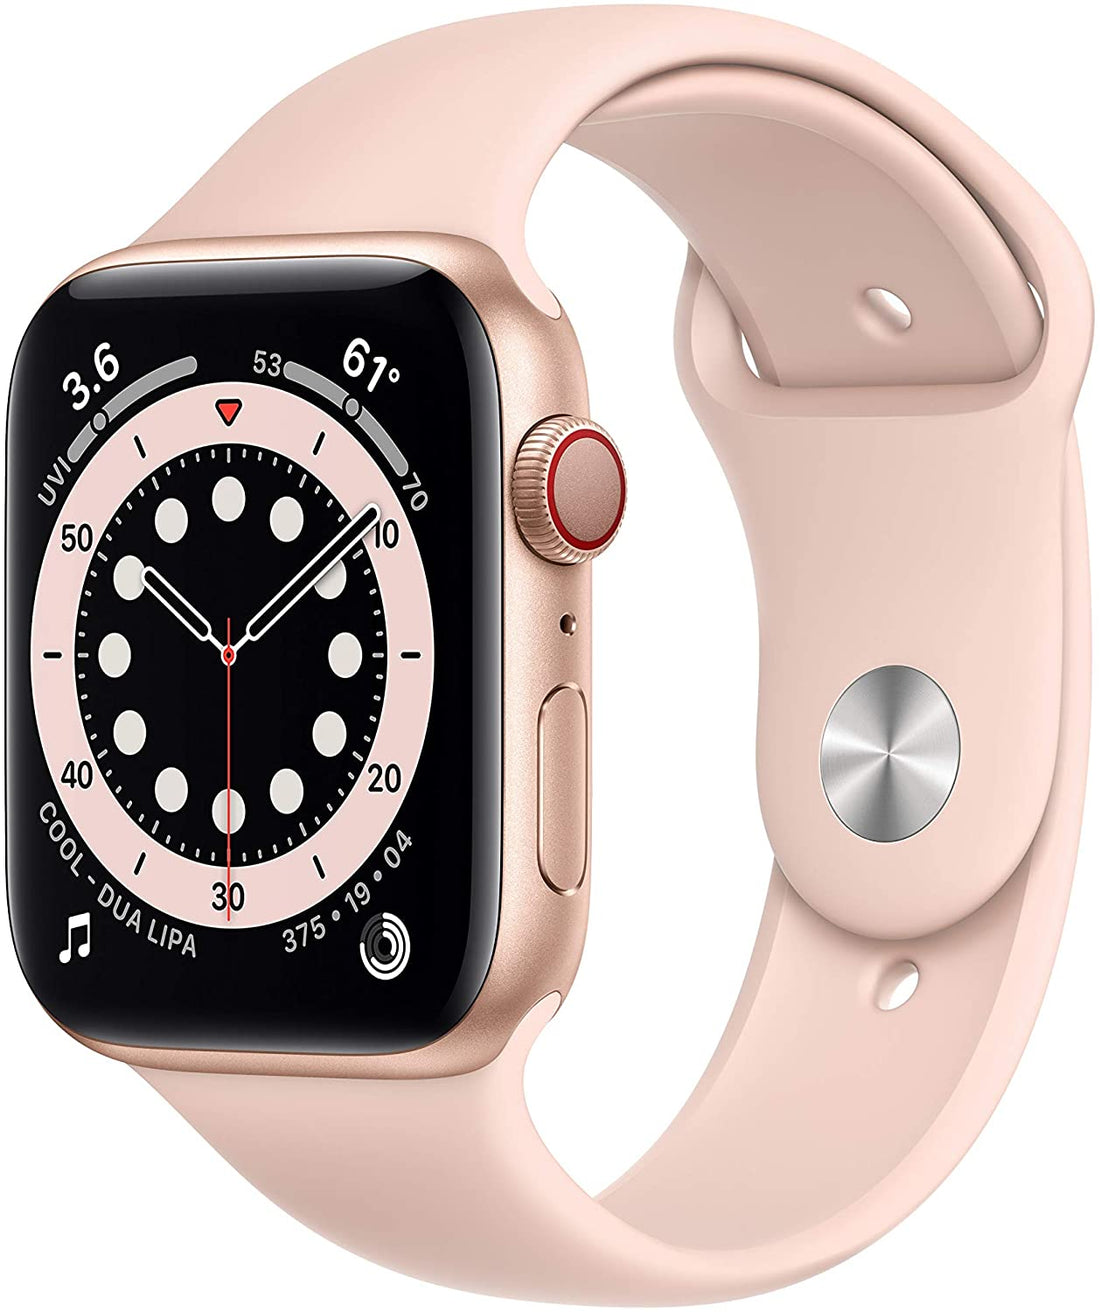 Apple Watch Series 6 (GPS + LTE) 44mm Gold Aluminum Case &amp; Pink Sand Sport Band (Refurbished)